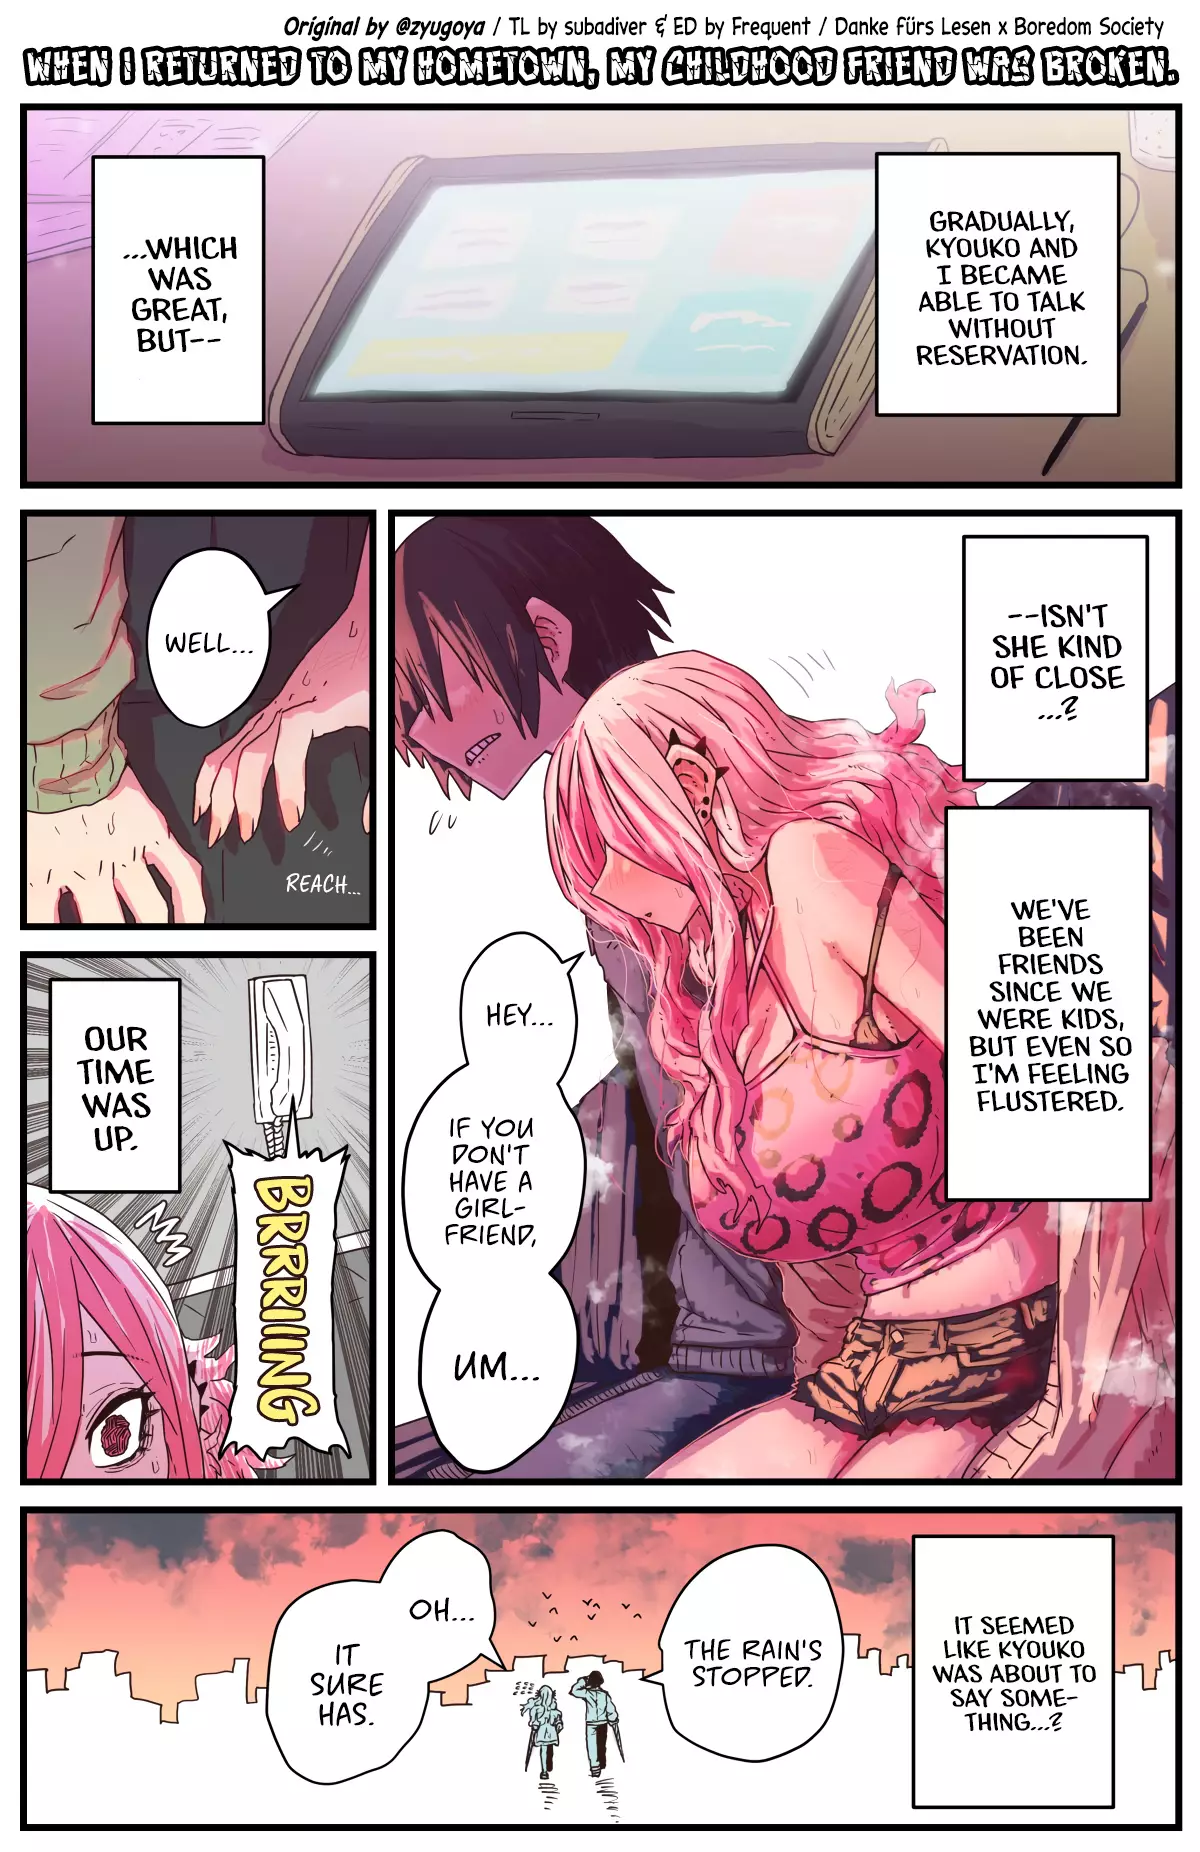 When I Returned To My Hometown, My Childhood Friend Was Broken - 8 page 1-10fb7fc1